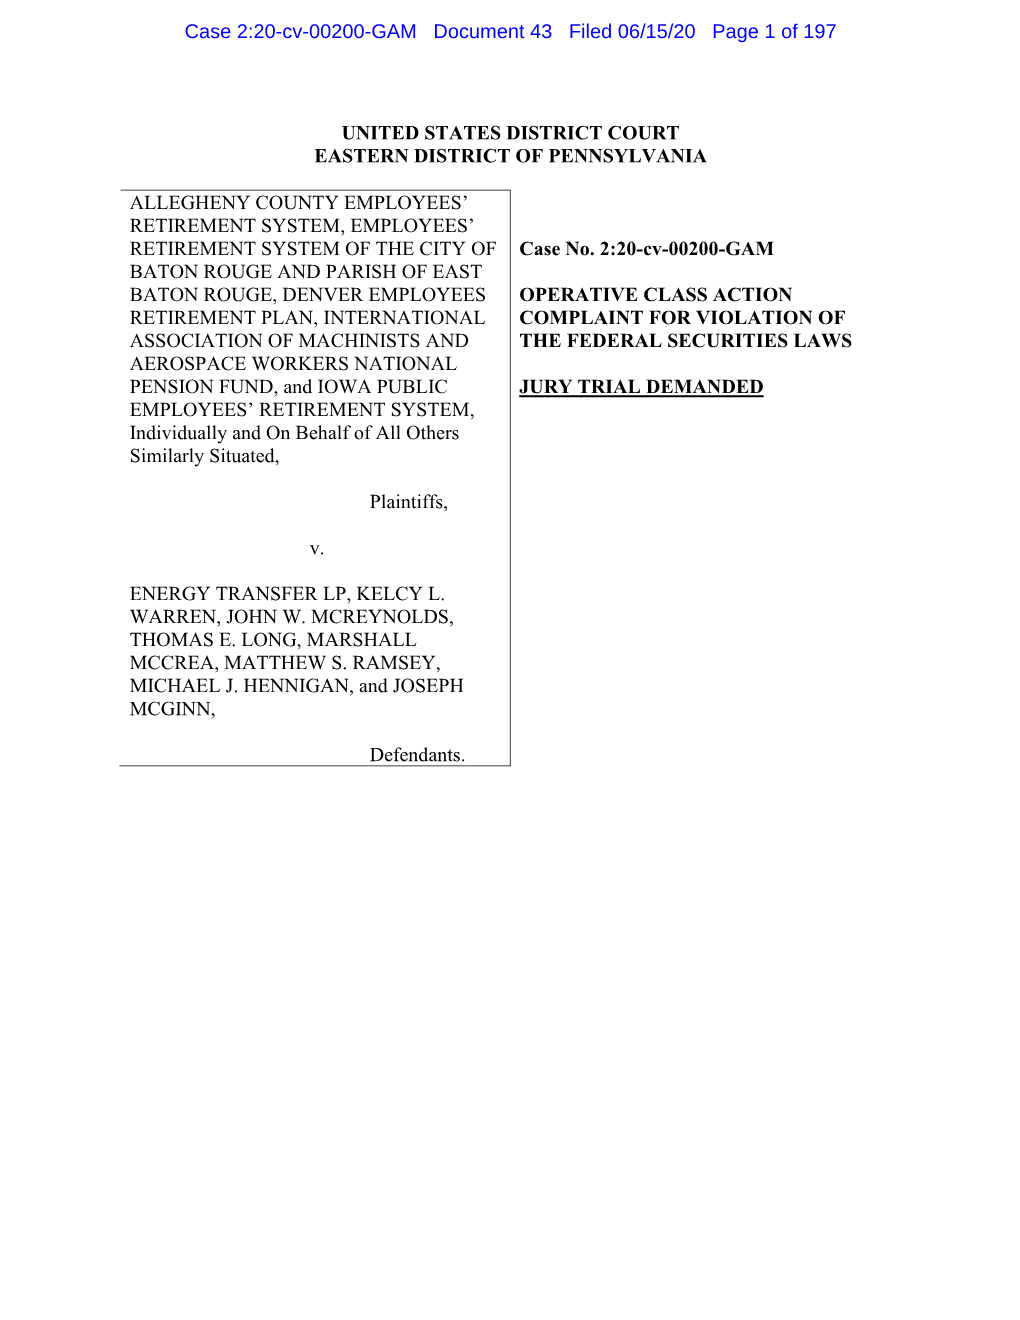 Case 2:20-Cv-00200-GAM Document 43 Filed 06/15/20 Page 1 of 197